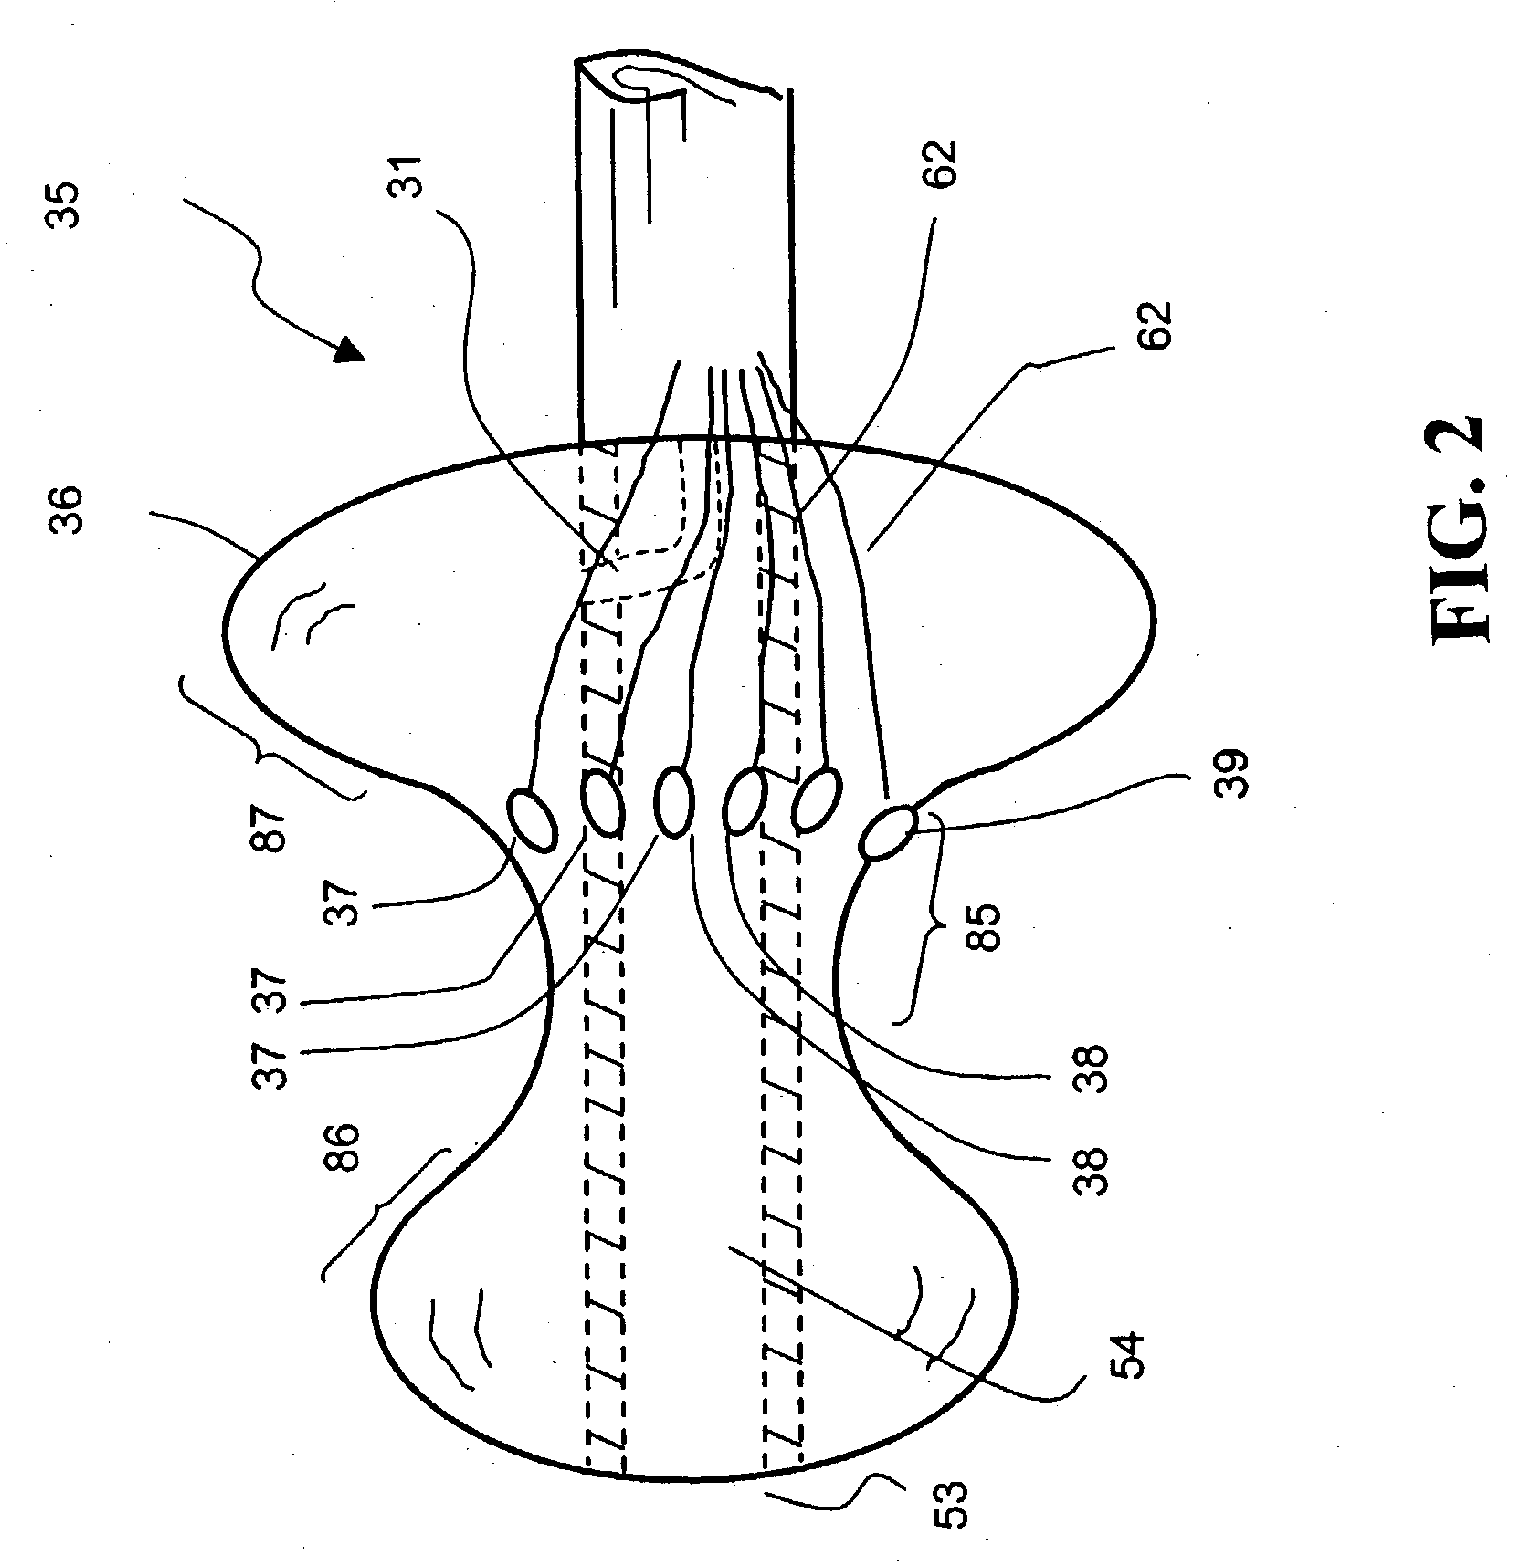 Method for treating and repairing mitral valve annulus